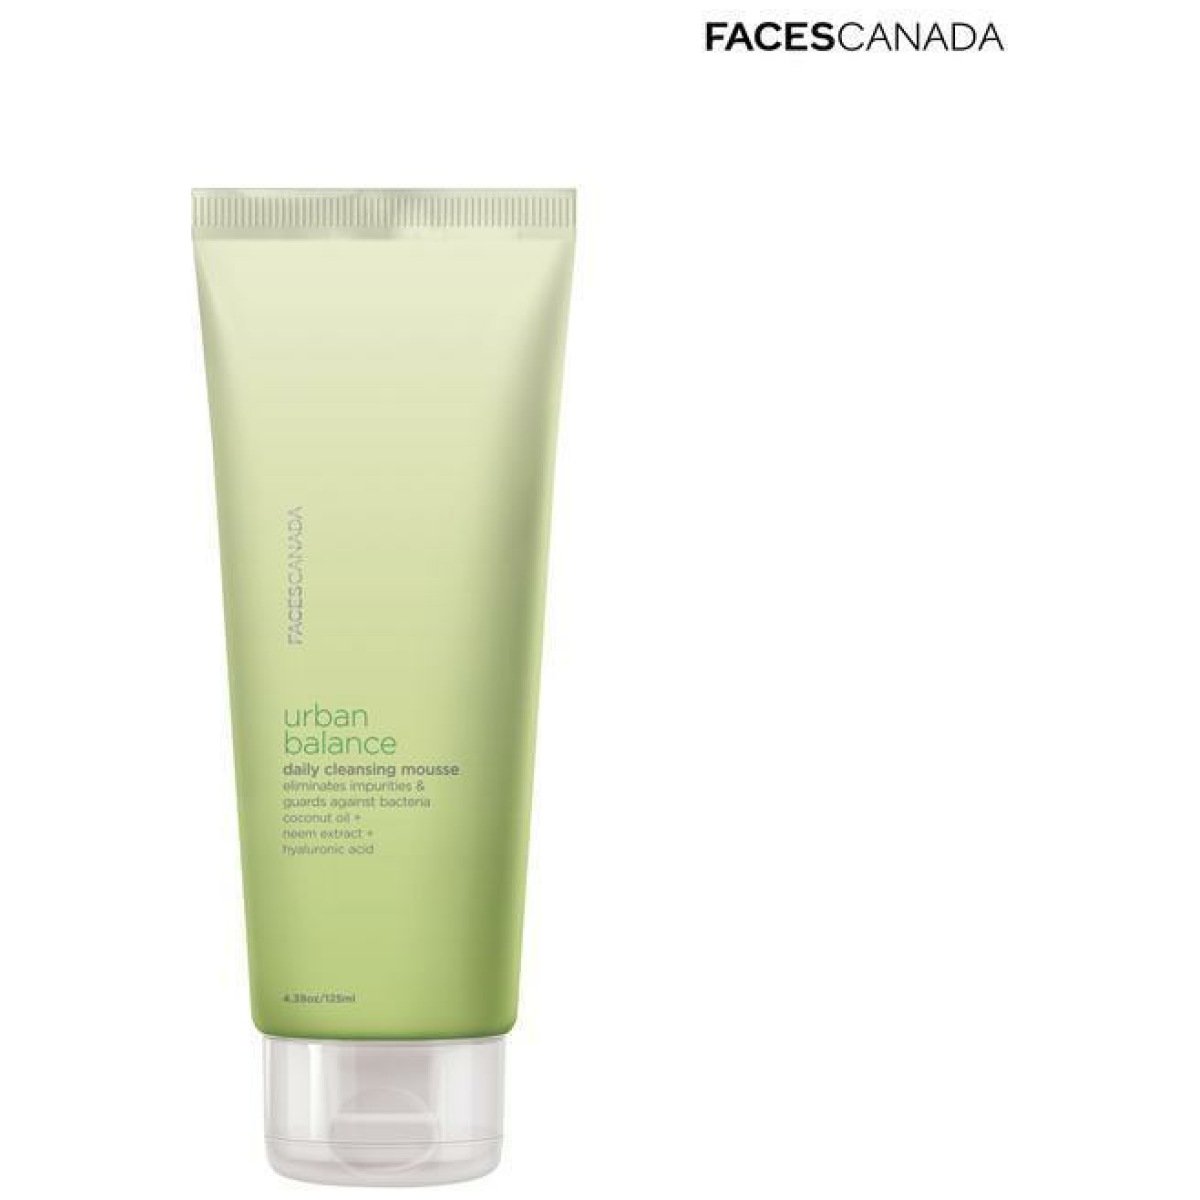 Faces Canada Urban Balance Daily Cleansing Mousse 125ml